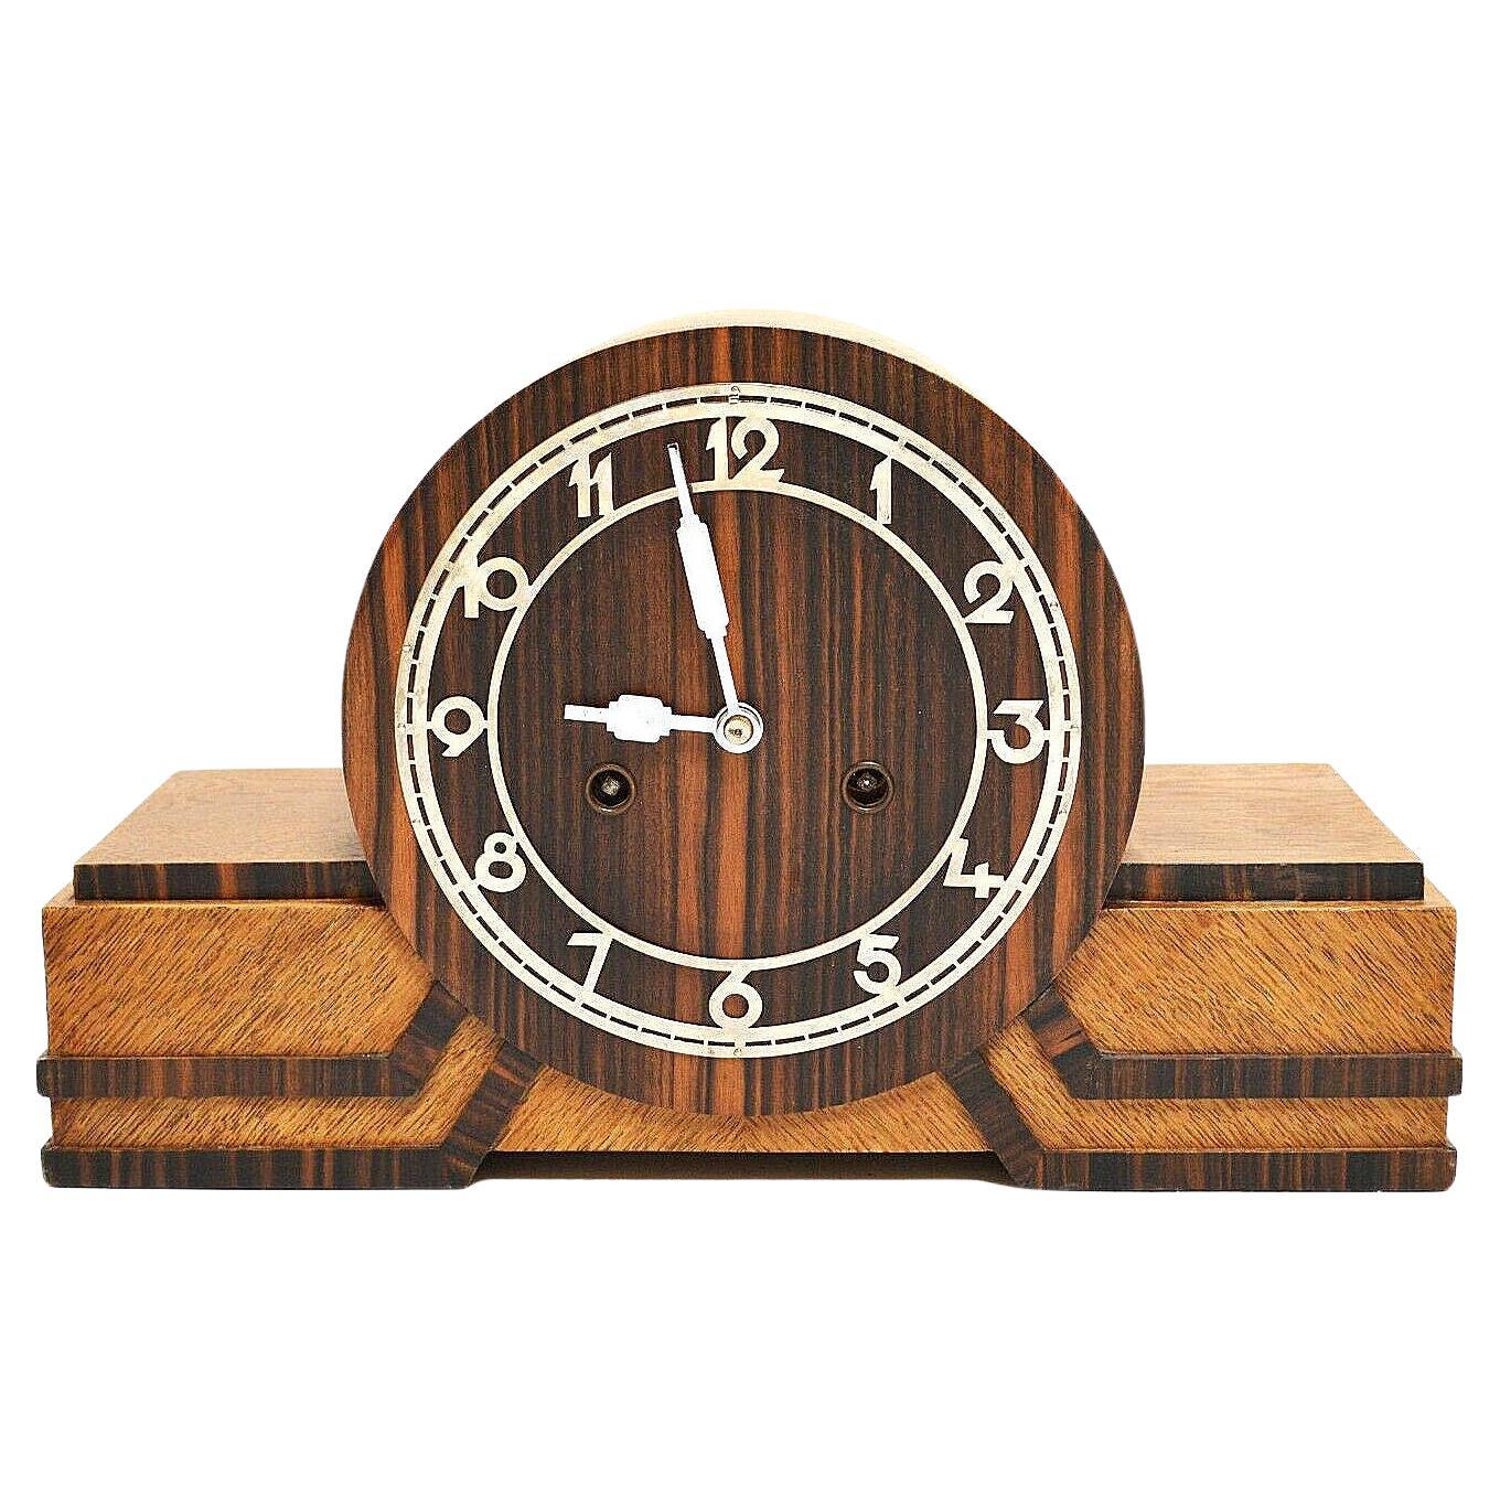 Art Deco Mantel Clock By Junghans, Germany, C1930 For Sale At 1Stdibs |  Junghans Mantel Clock